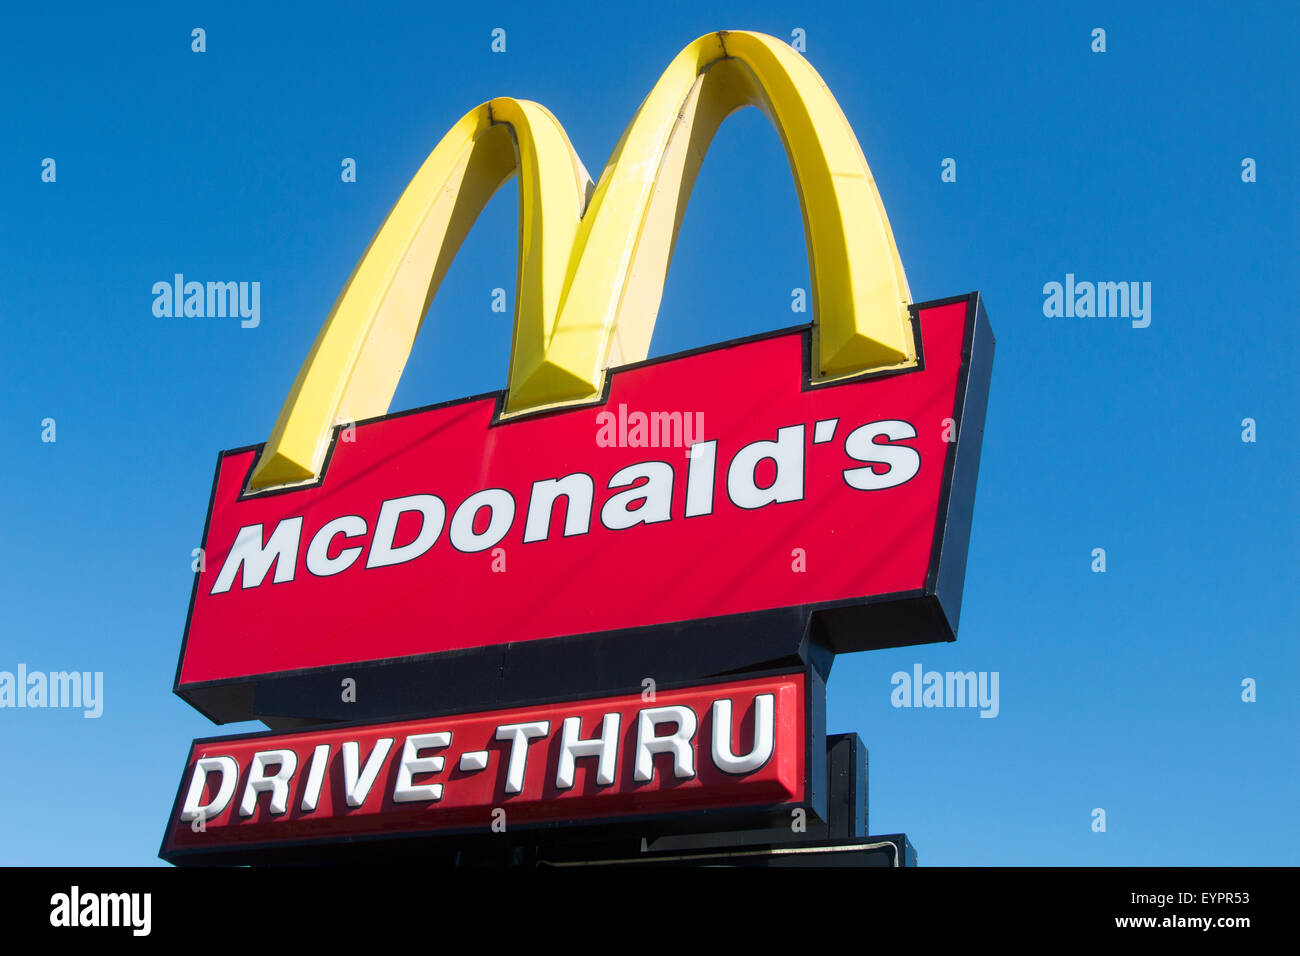 Mcdonalds famous sign and logo for drive thru meal on a deep blue sky ...